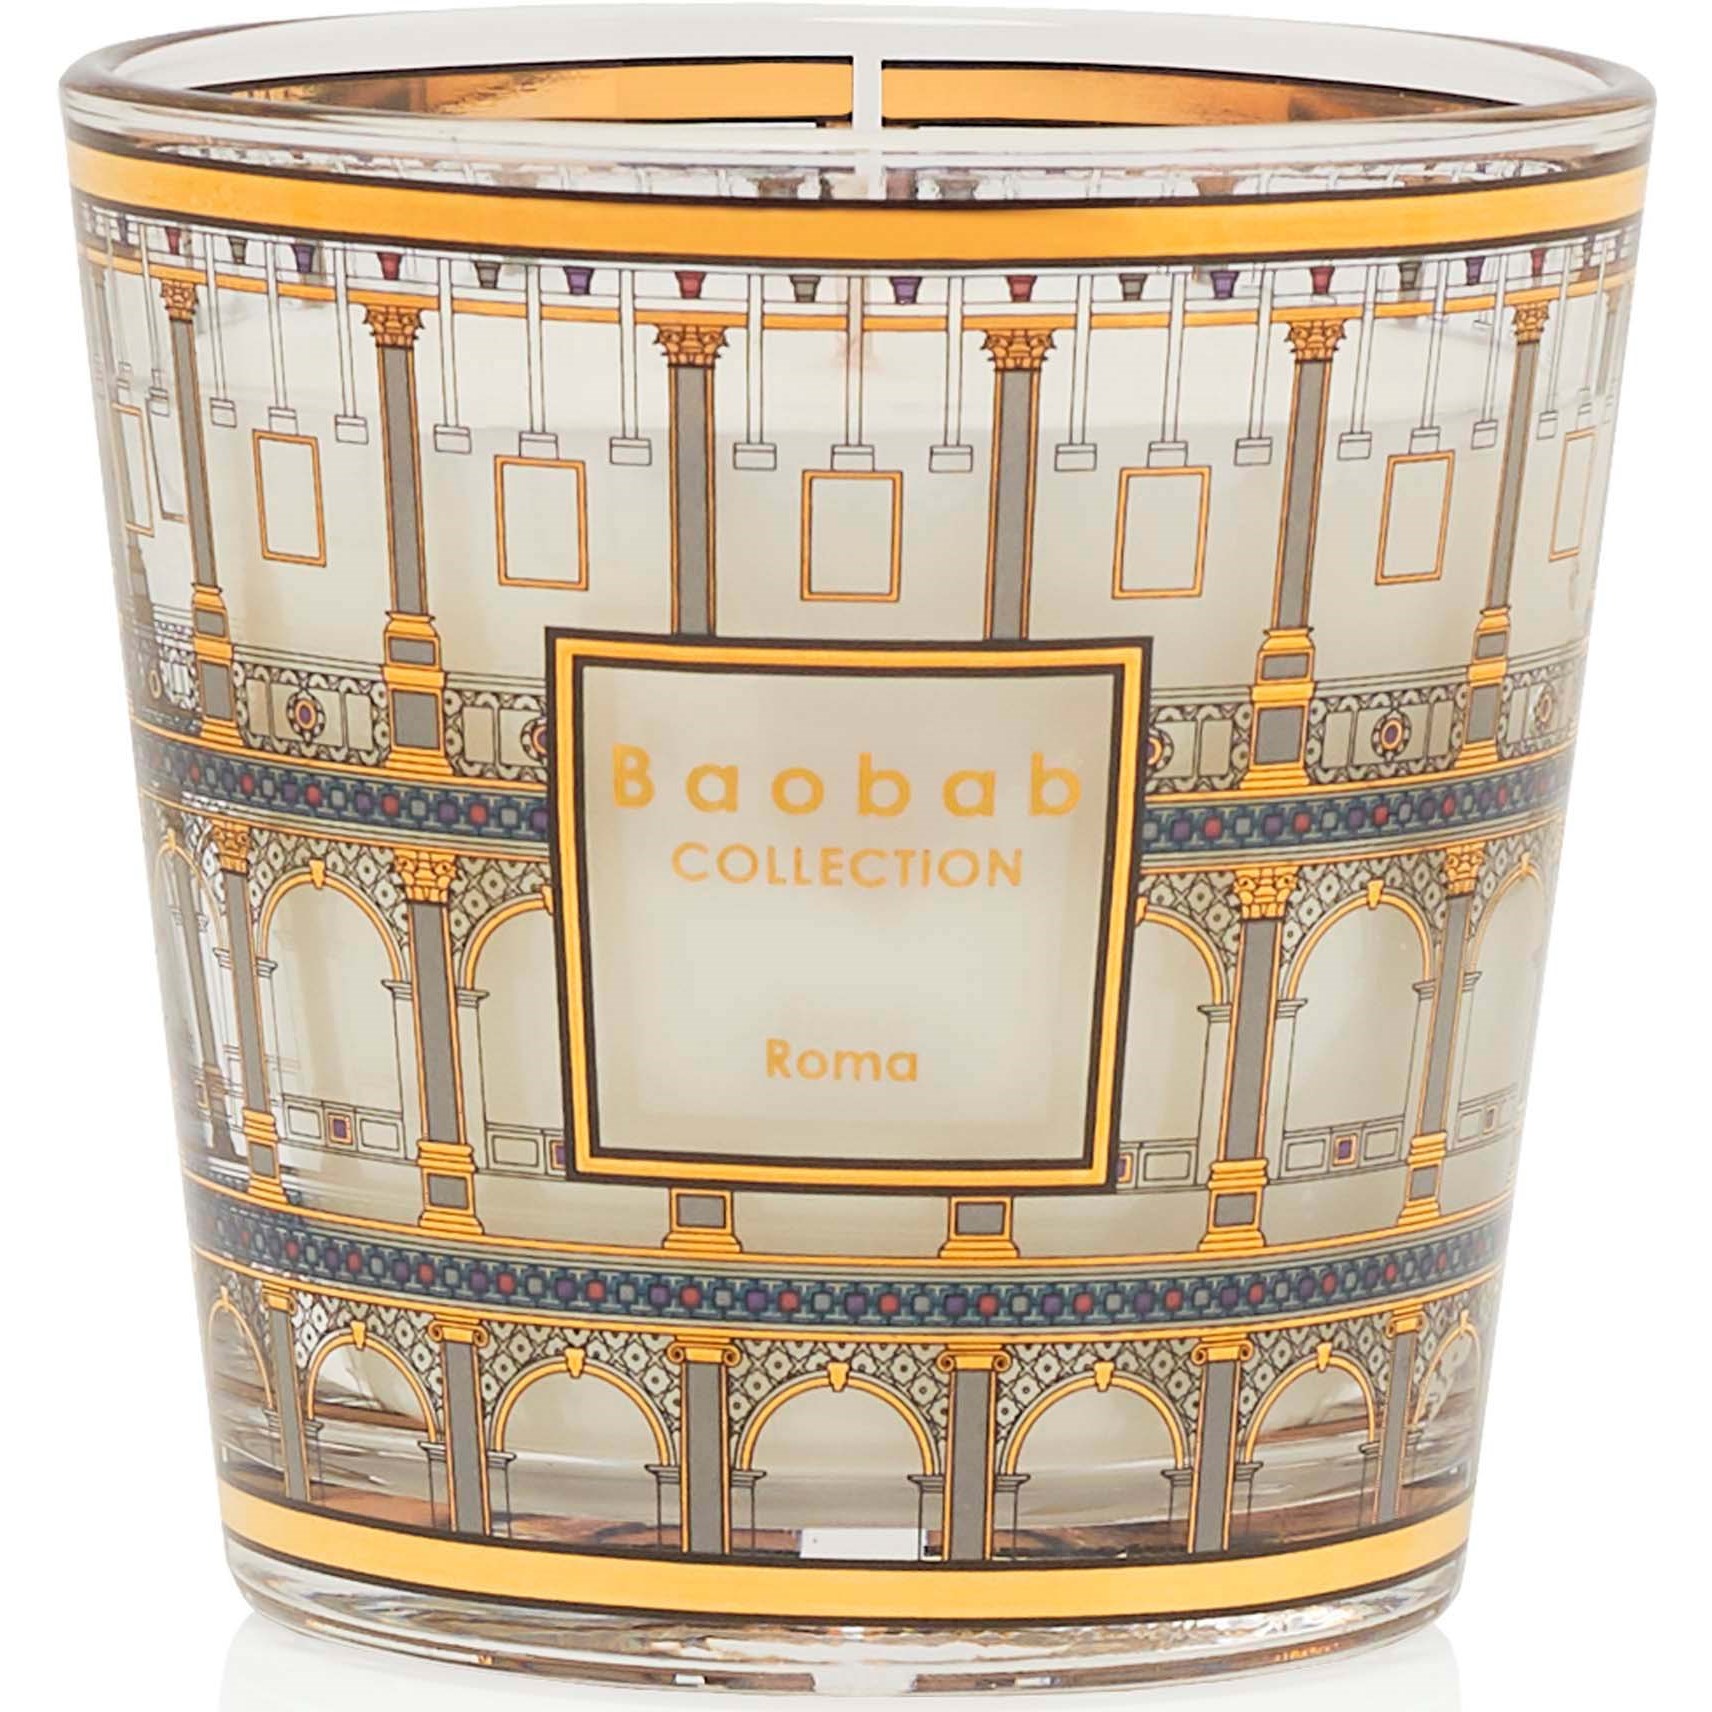 Baobab Collection Roma Fragranced Candle 190 g